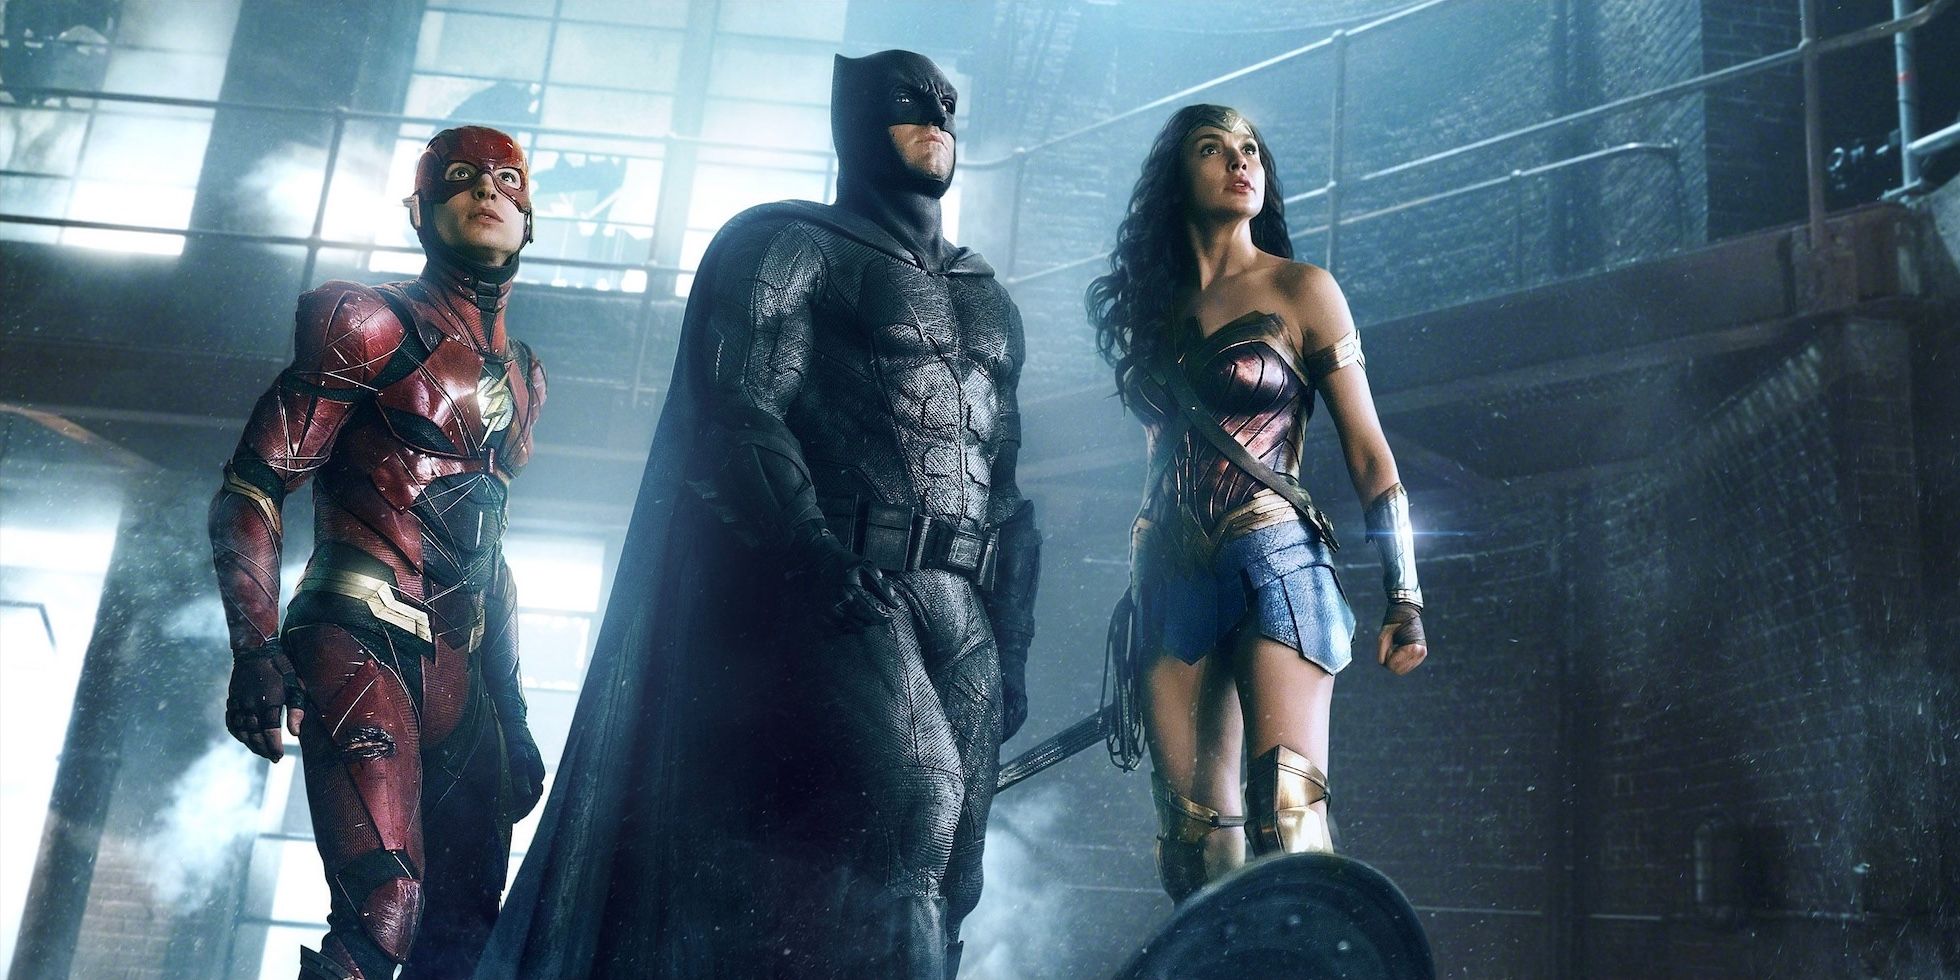 The Flash, Batman, and Wonder Woman standing together in Justice League